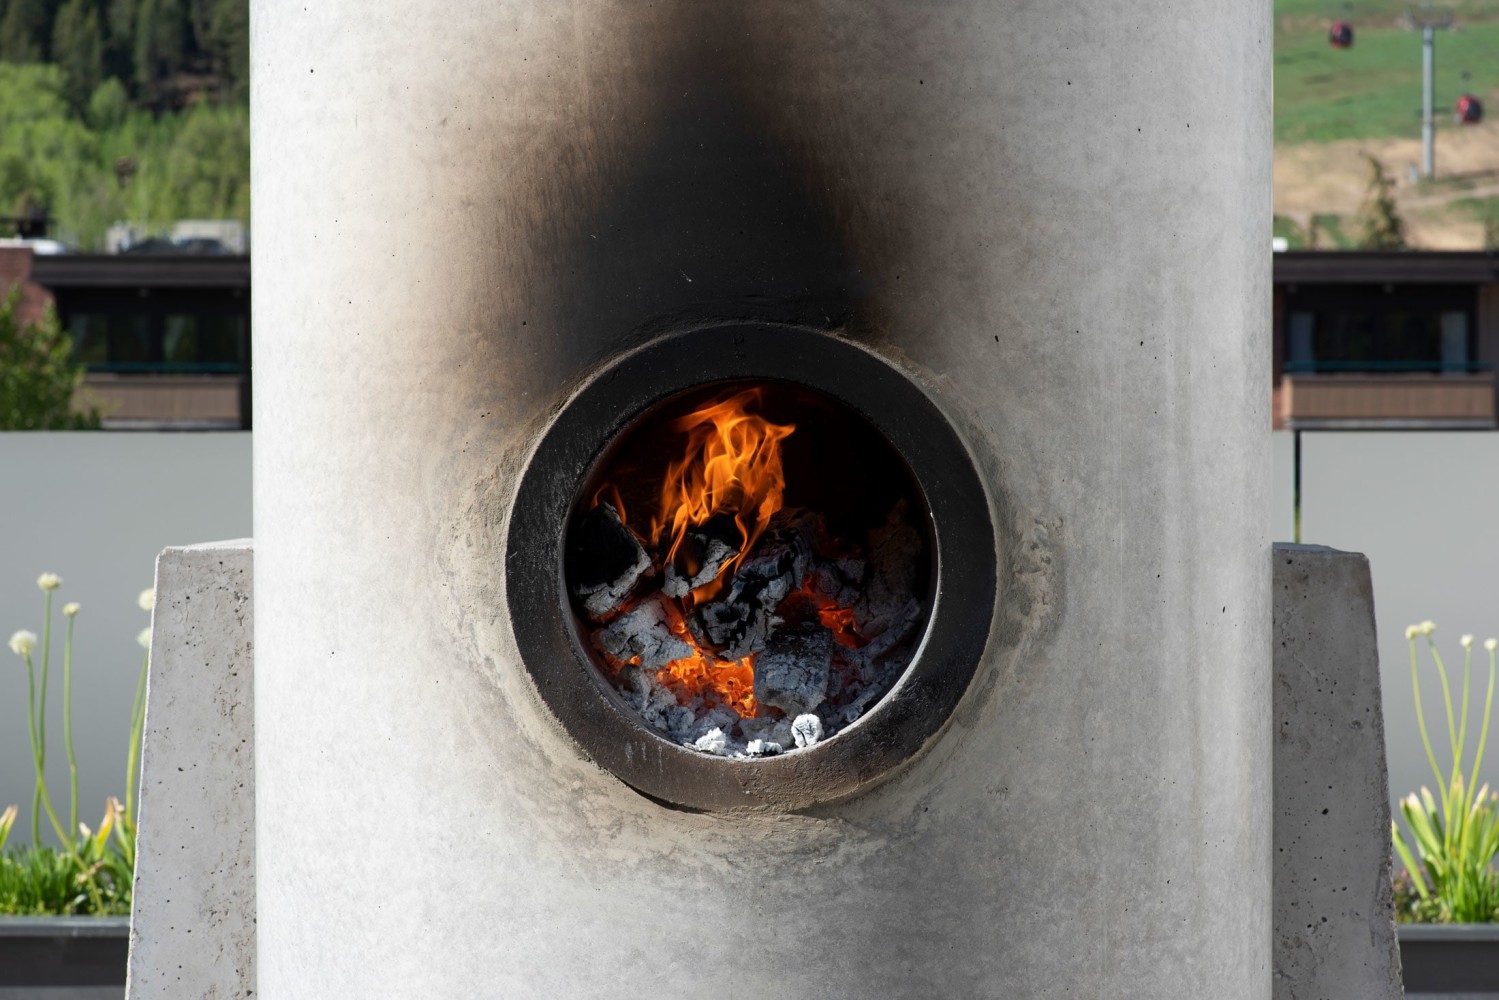 Oscar Tuazon
Fire Worship, 2019
Concrete, refractory cement, stainless steel, and fire
Dimensions variable
Installation view: Oscar Tuazon:&amp;nbsp;Fire Worship, Aspen Art Museum, 2019. Photo: Tony Prikryl